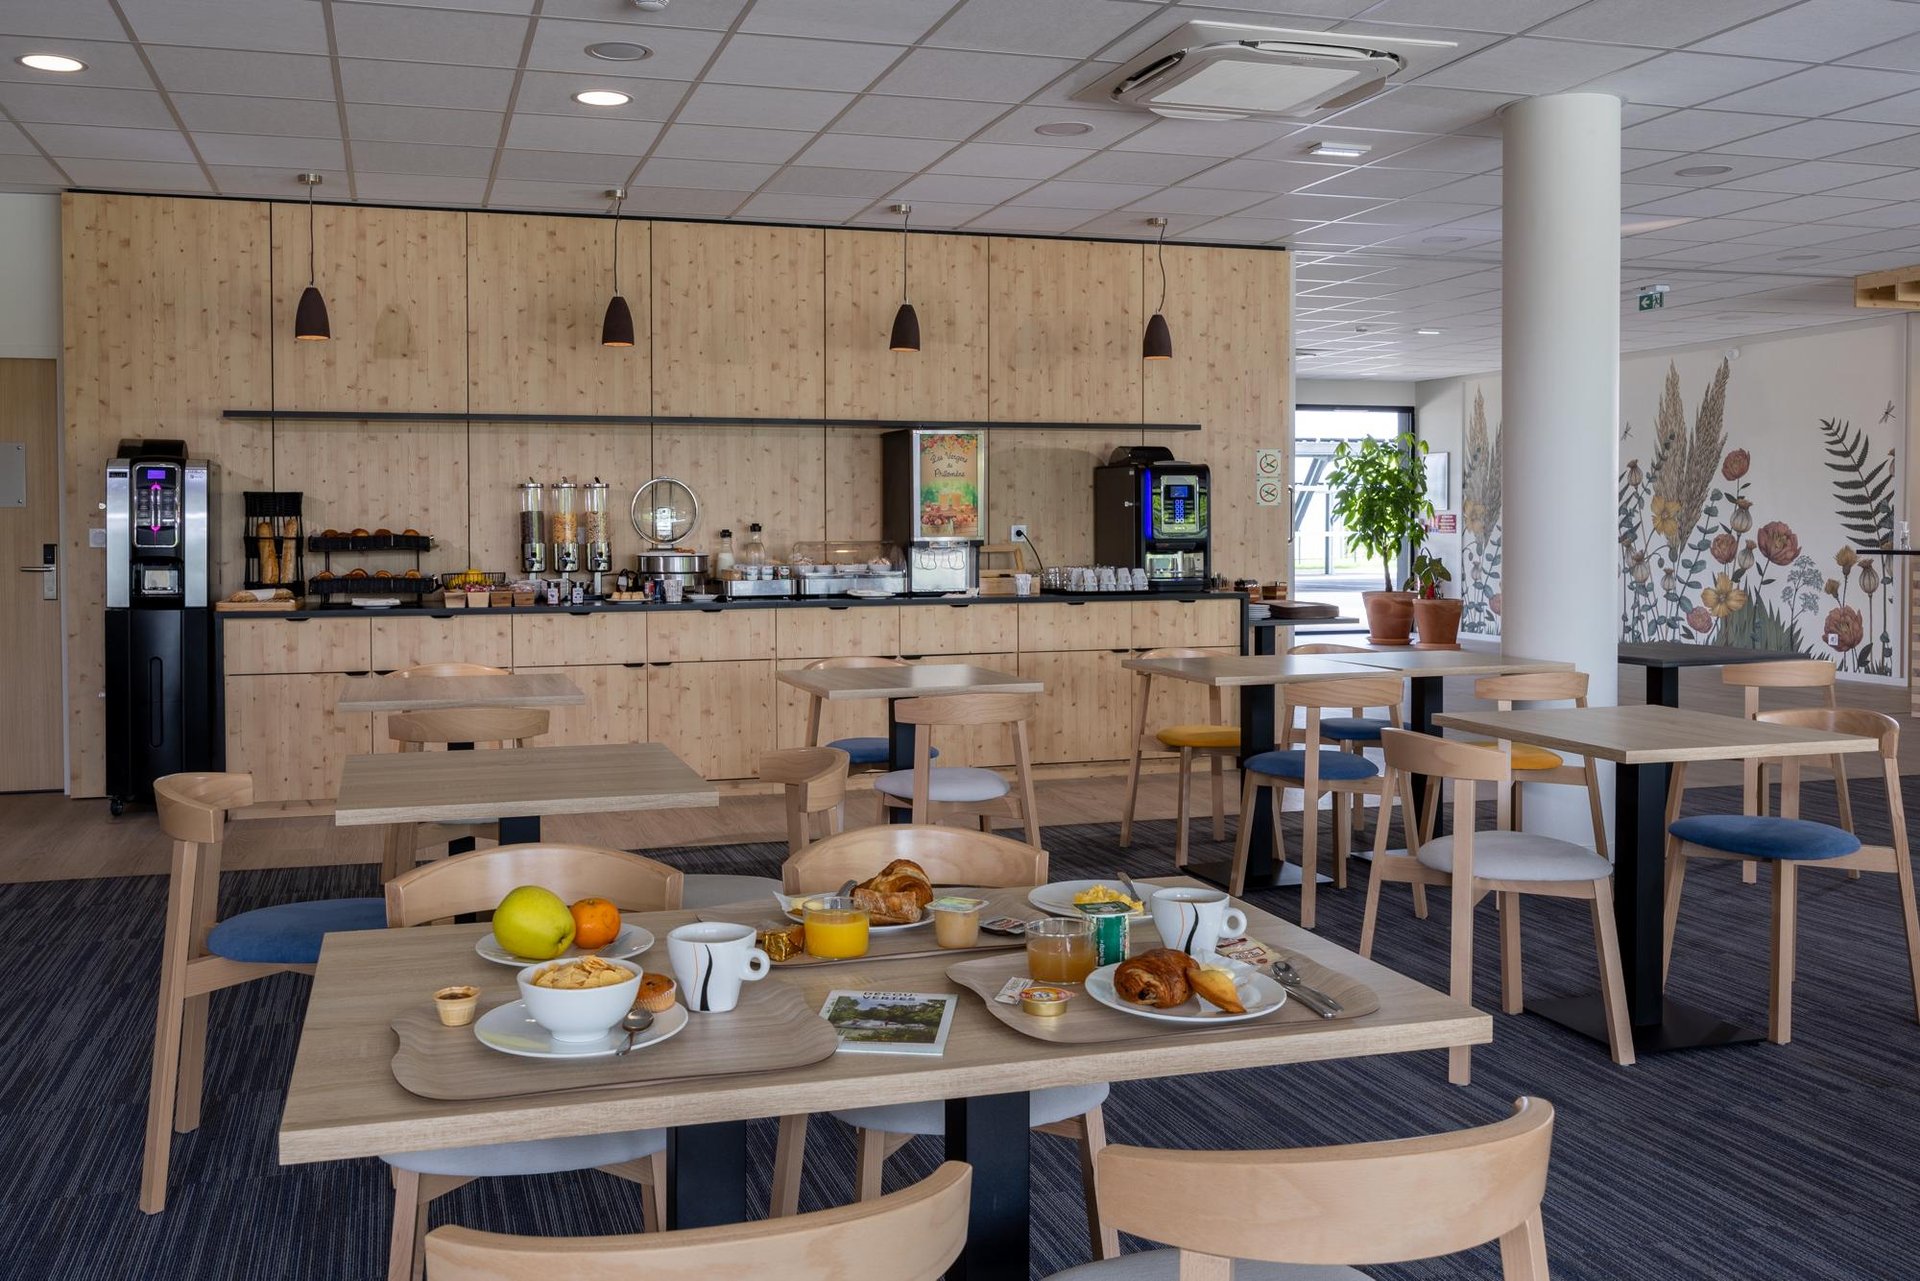 Le Relais des Deux Mers | 3 star hotel Marmande | Breakfast | Sweet and savoury buffet